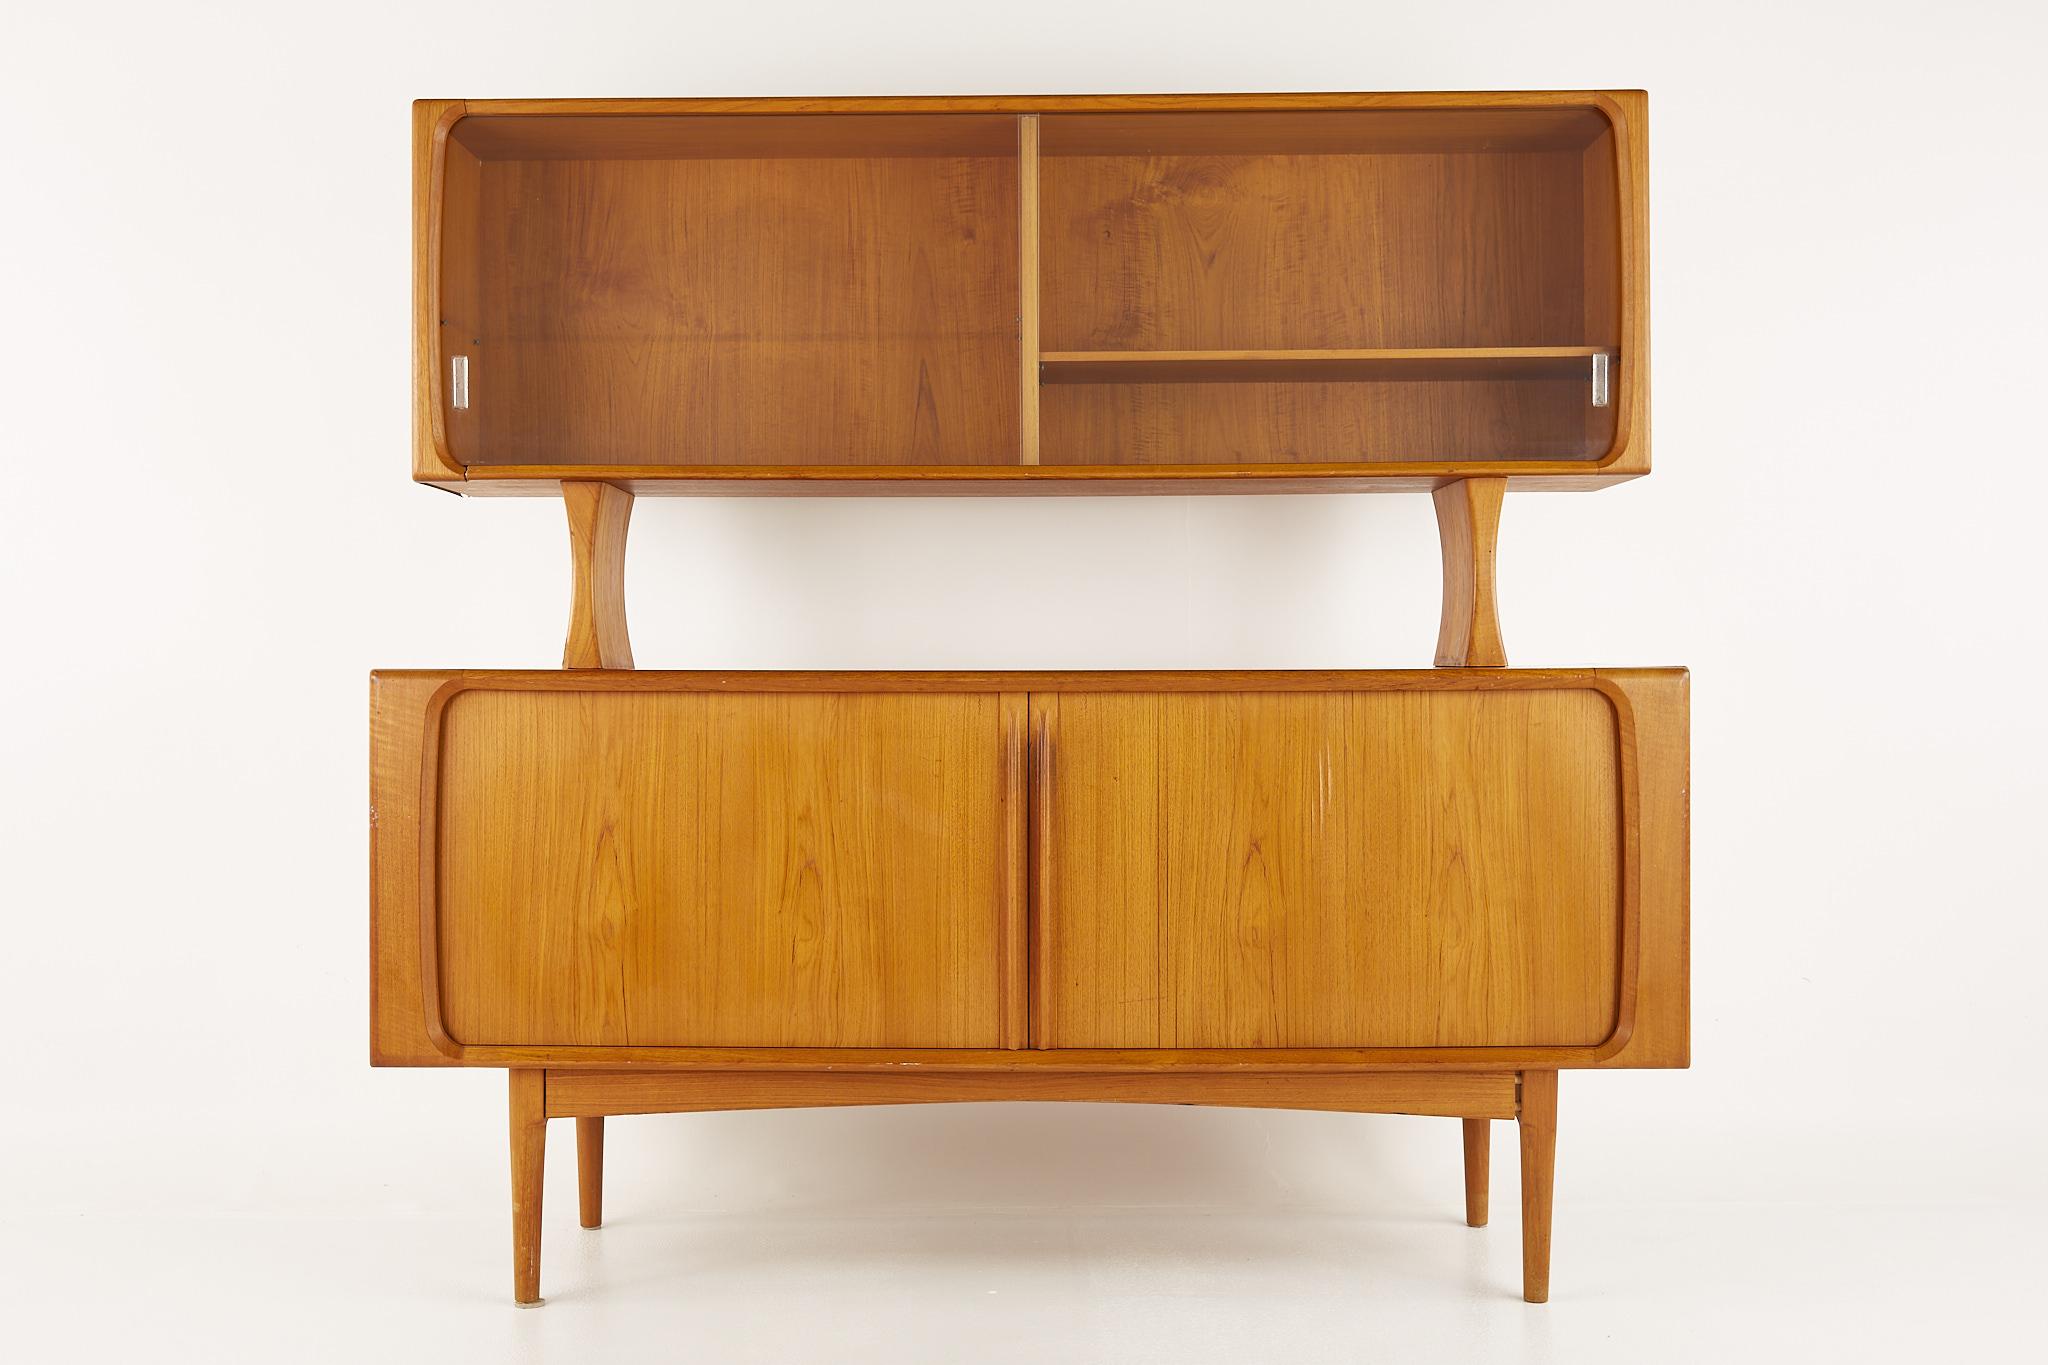 Bernhardt Pedersen mid century teak tambour door credenza with hutch

Credenza and hutch measures: 65 wide x 19.75 deep x 62 inches high

?All pieces of furniture can be had in what we call restored vintage condition. That means the piece is